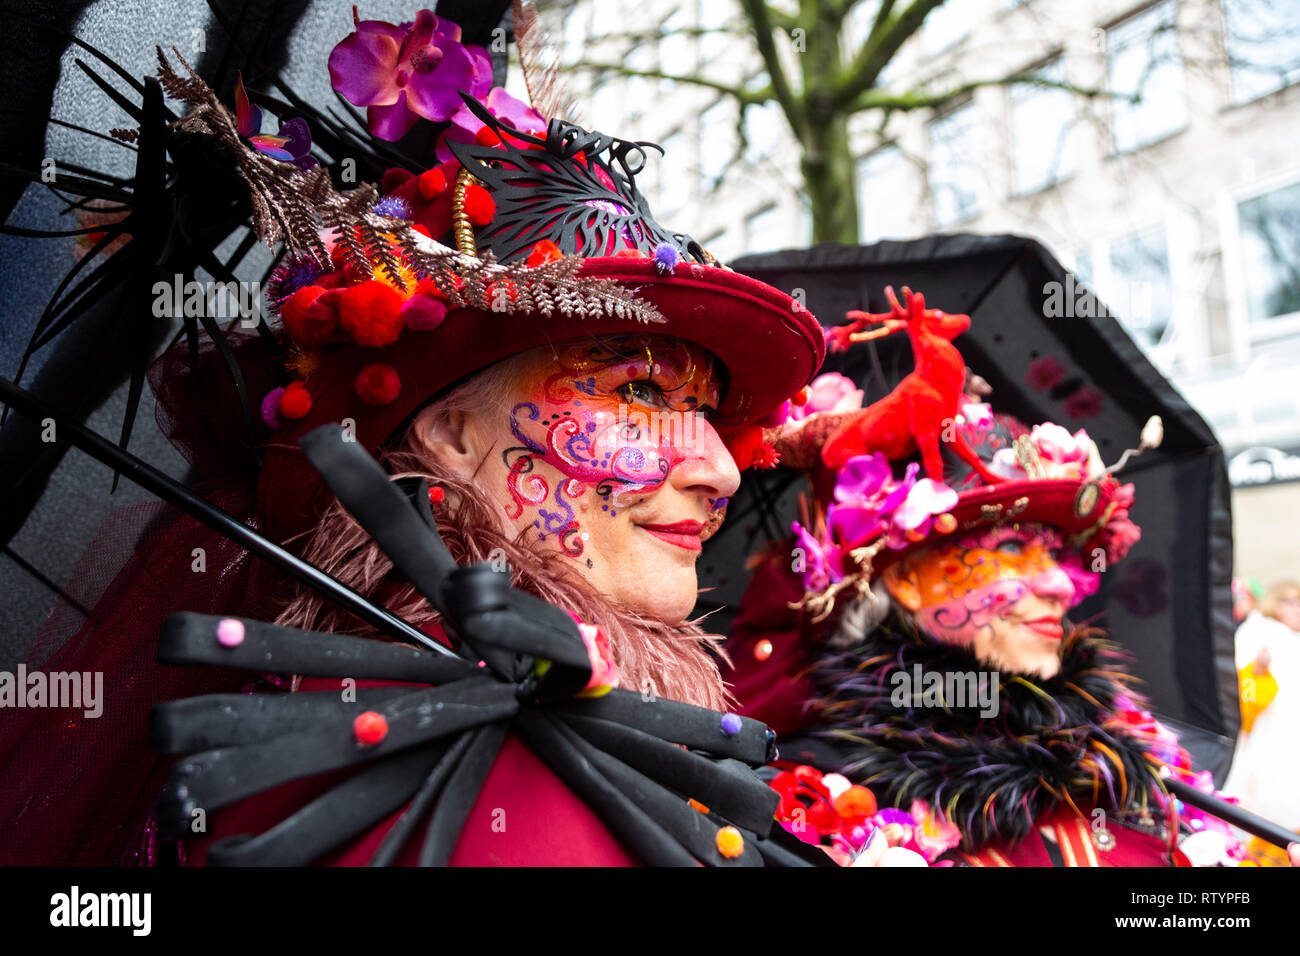 Dusseldorf, Germany. 3 March 2019. Colourful costumes are on display at the traditional Kö-Treiben even on Dusseldorf's Königsallee ahead of the traditional carnival parades on Rose Monday (Shrove Monday). The parades in the Rhineland are in doubt because of the forecast storms. Credit: Vibrant Pictures/Alamy Live News Stock Photo